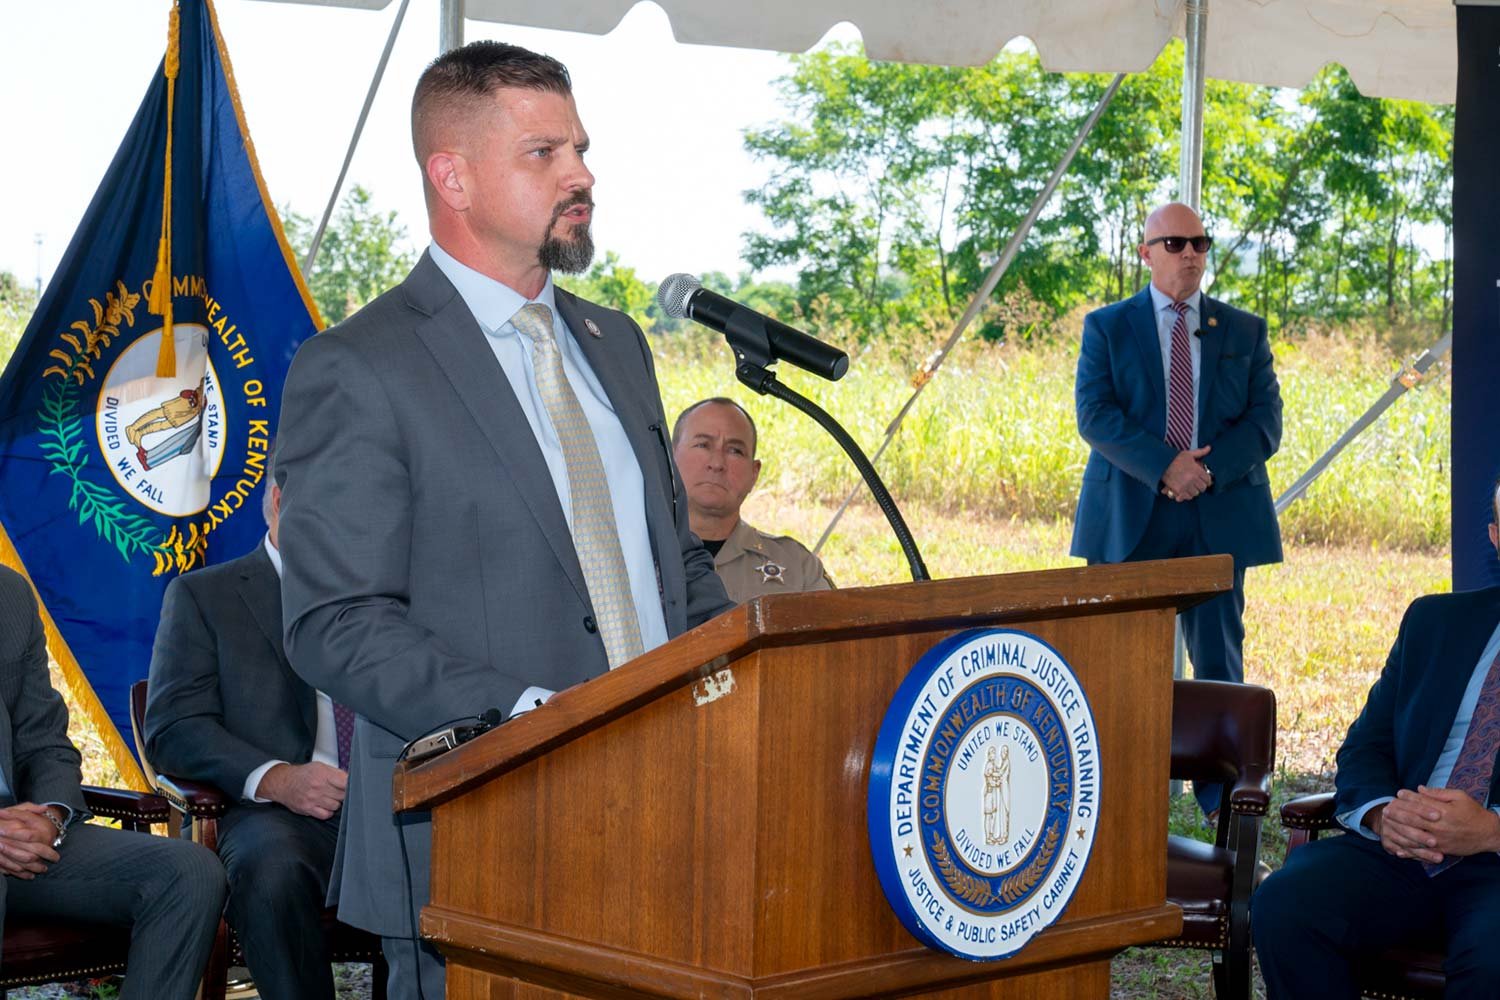  Department of Criminal Justice Training Commissioner Nicolai Jilek addresses the crowd gathered at Monday’s groundbreaking ceremony. (Photo by Jim Robertson) 